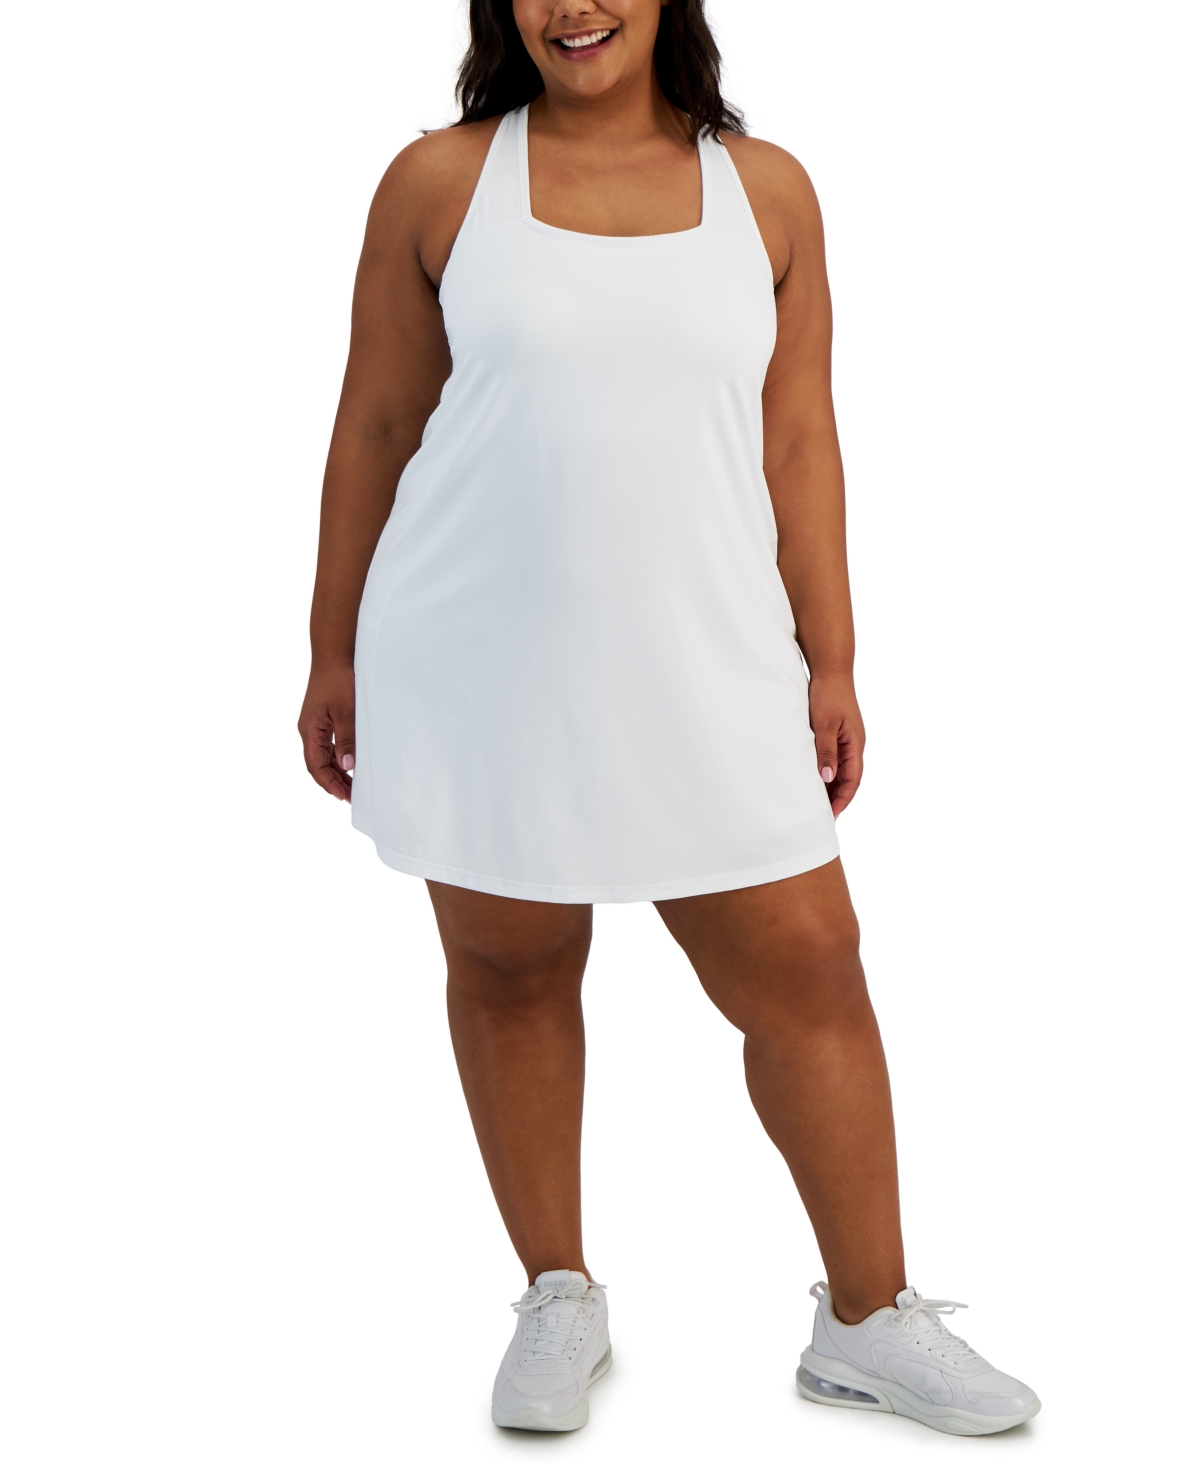 Plus Size Active Solid Cross-Back Sleeveless Dress, Created for Macy's - Bright White